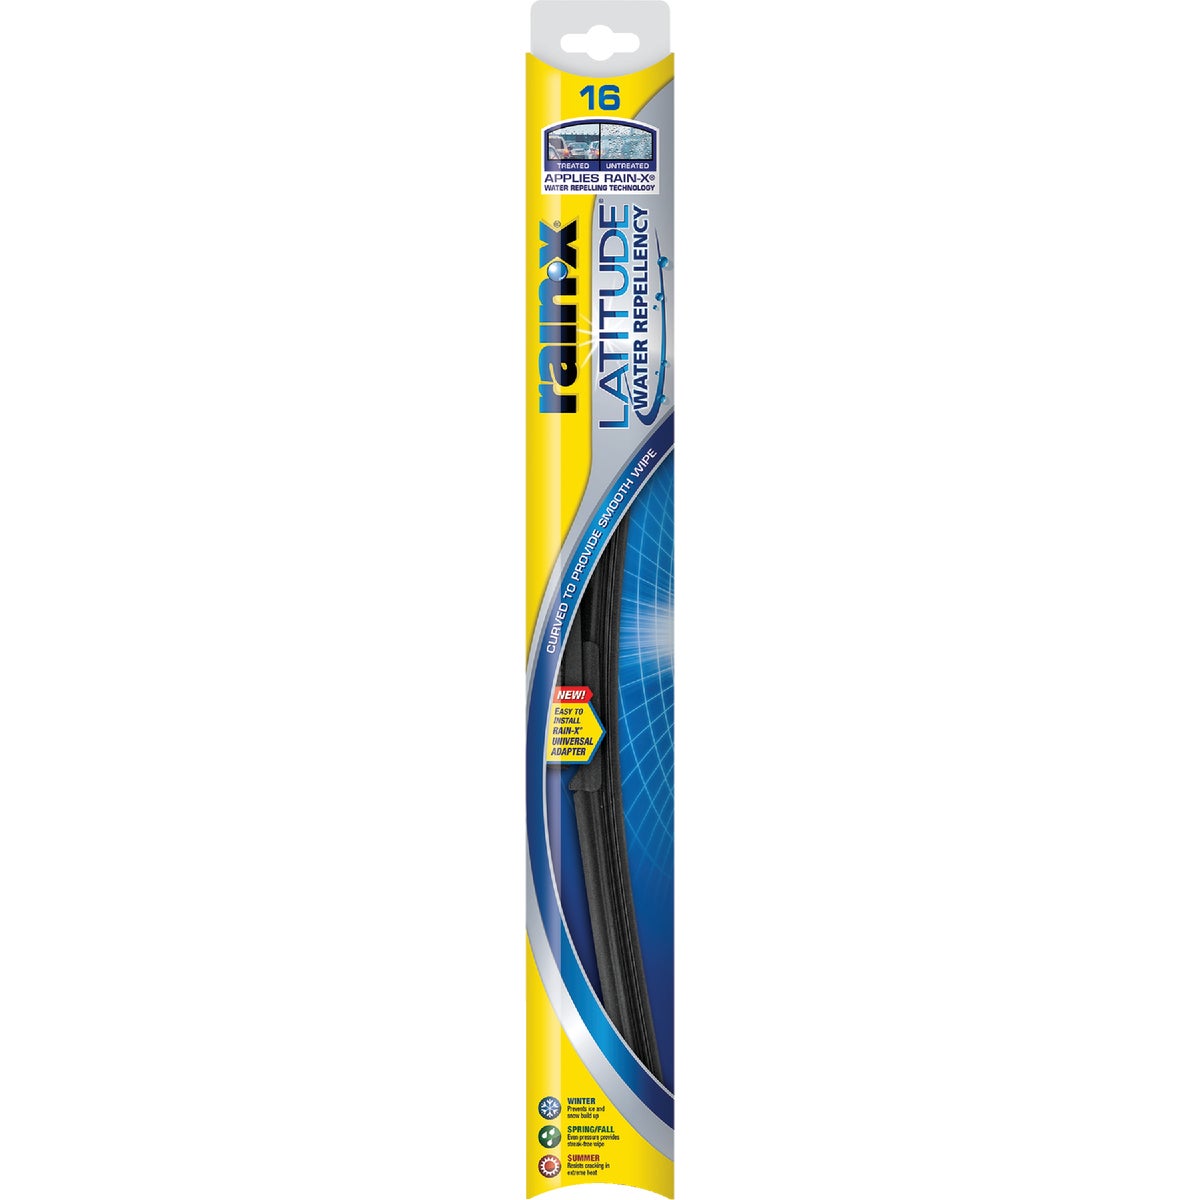 Item 575739, Rain-X Latitude wiper blades offer ultimate visibility in rain, sleet, and 